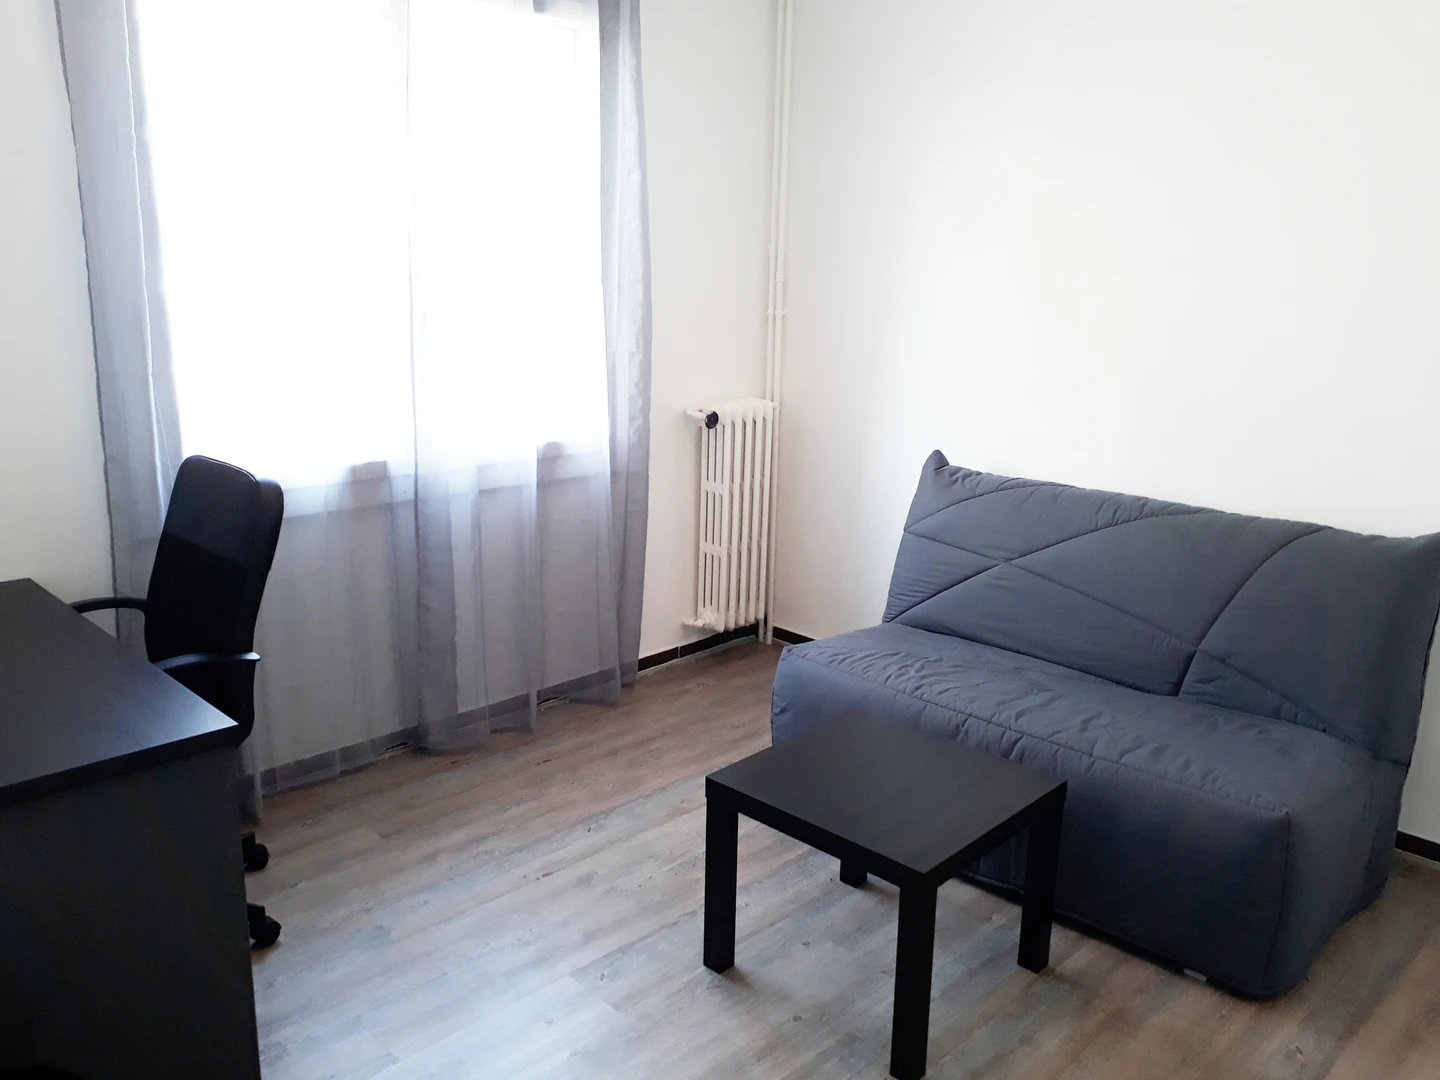 Renting rooms by the month in Toulon